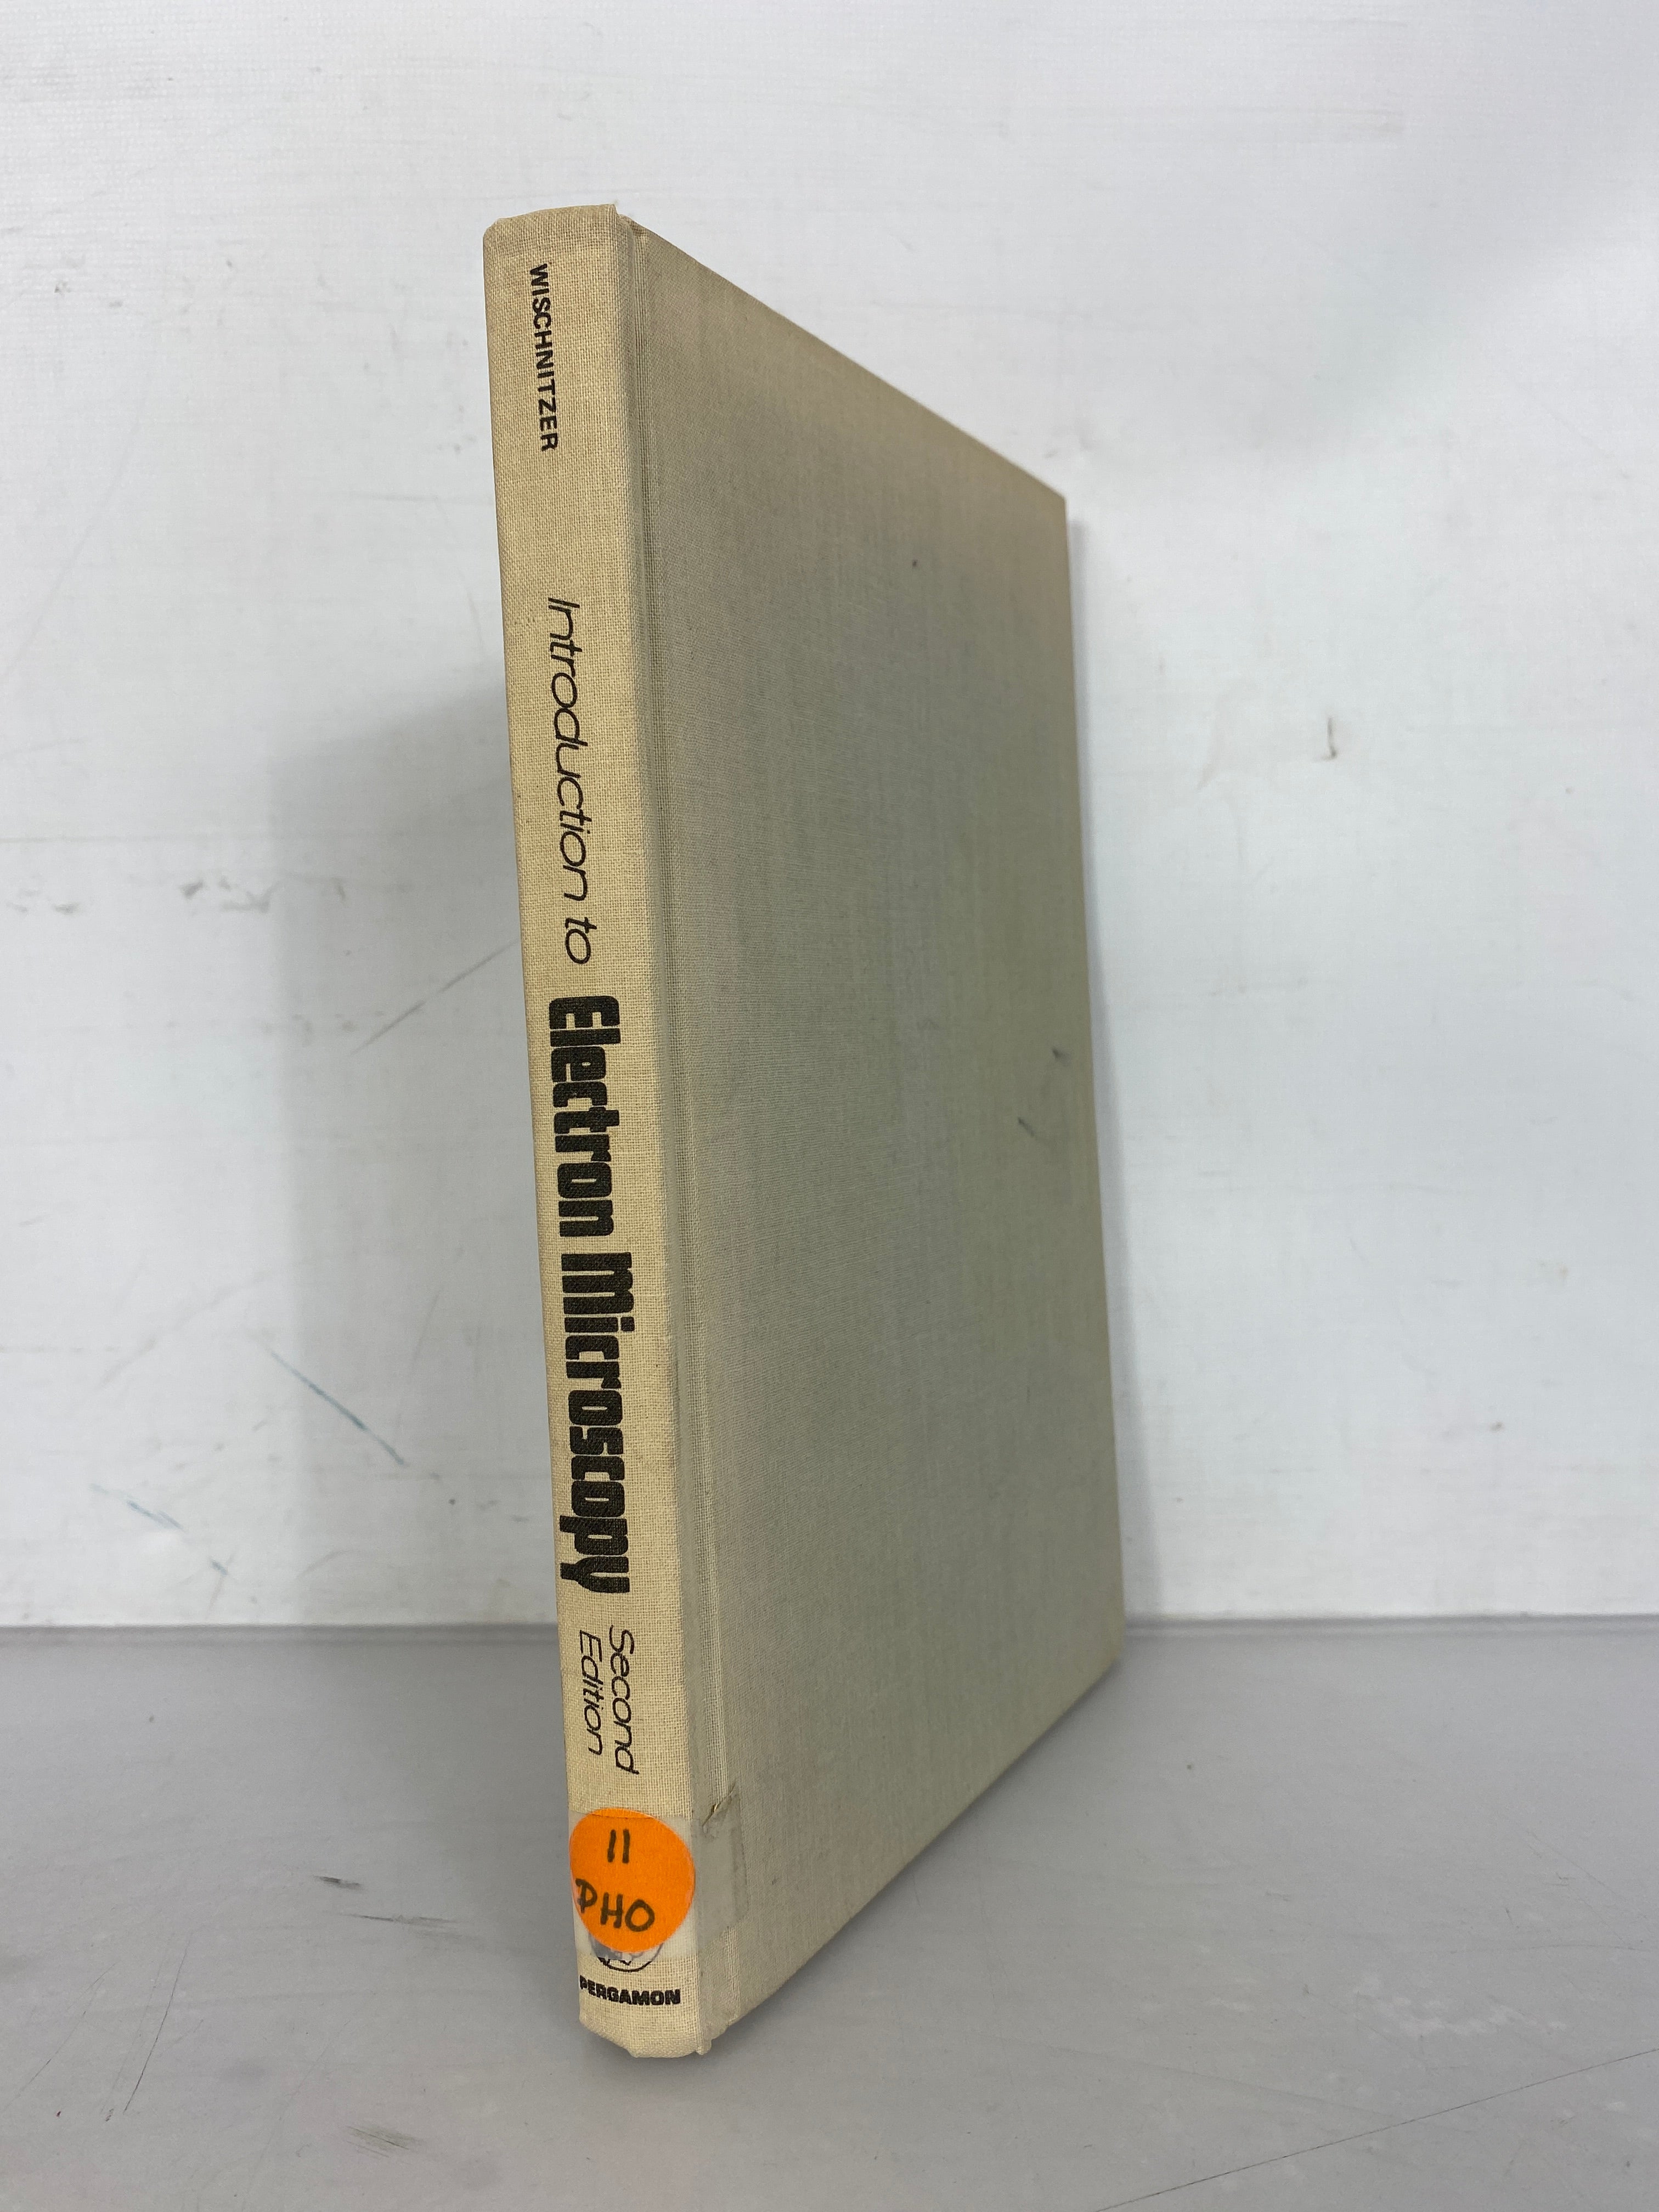 Introduction to Electron Microscopy by Saul Wischnitzer Second Edition 1970 HC